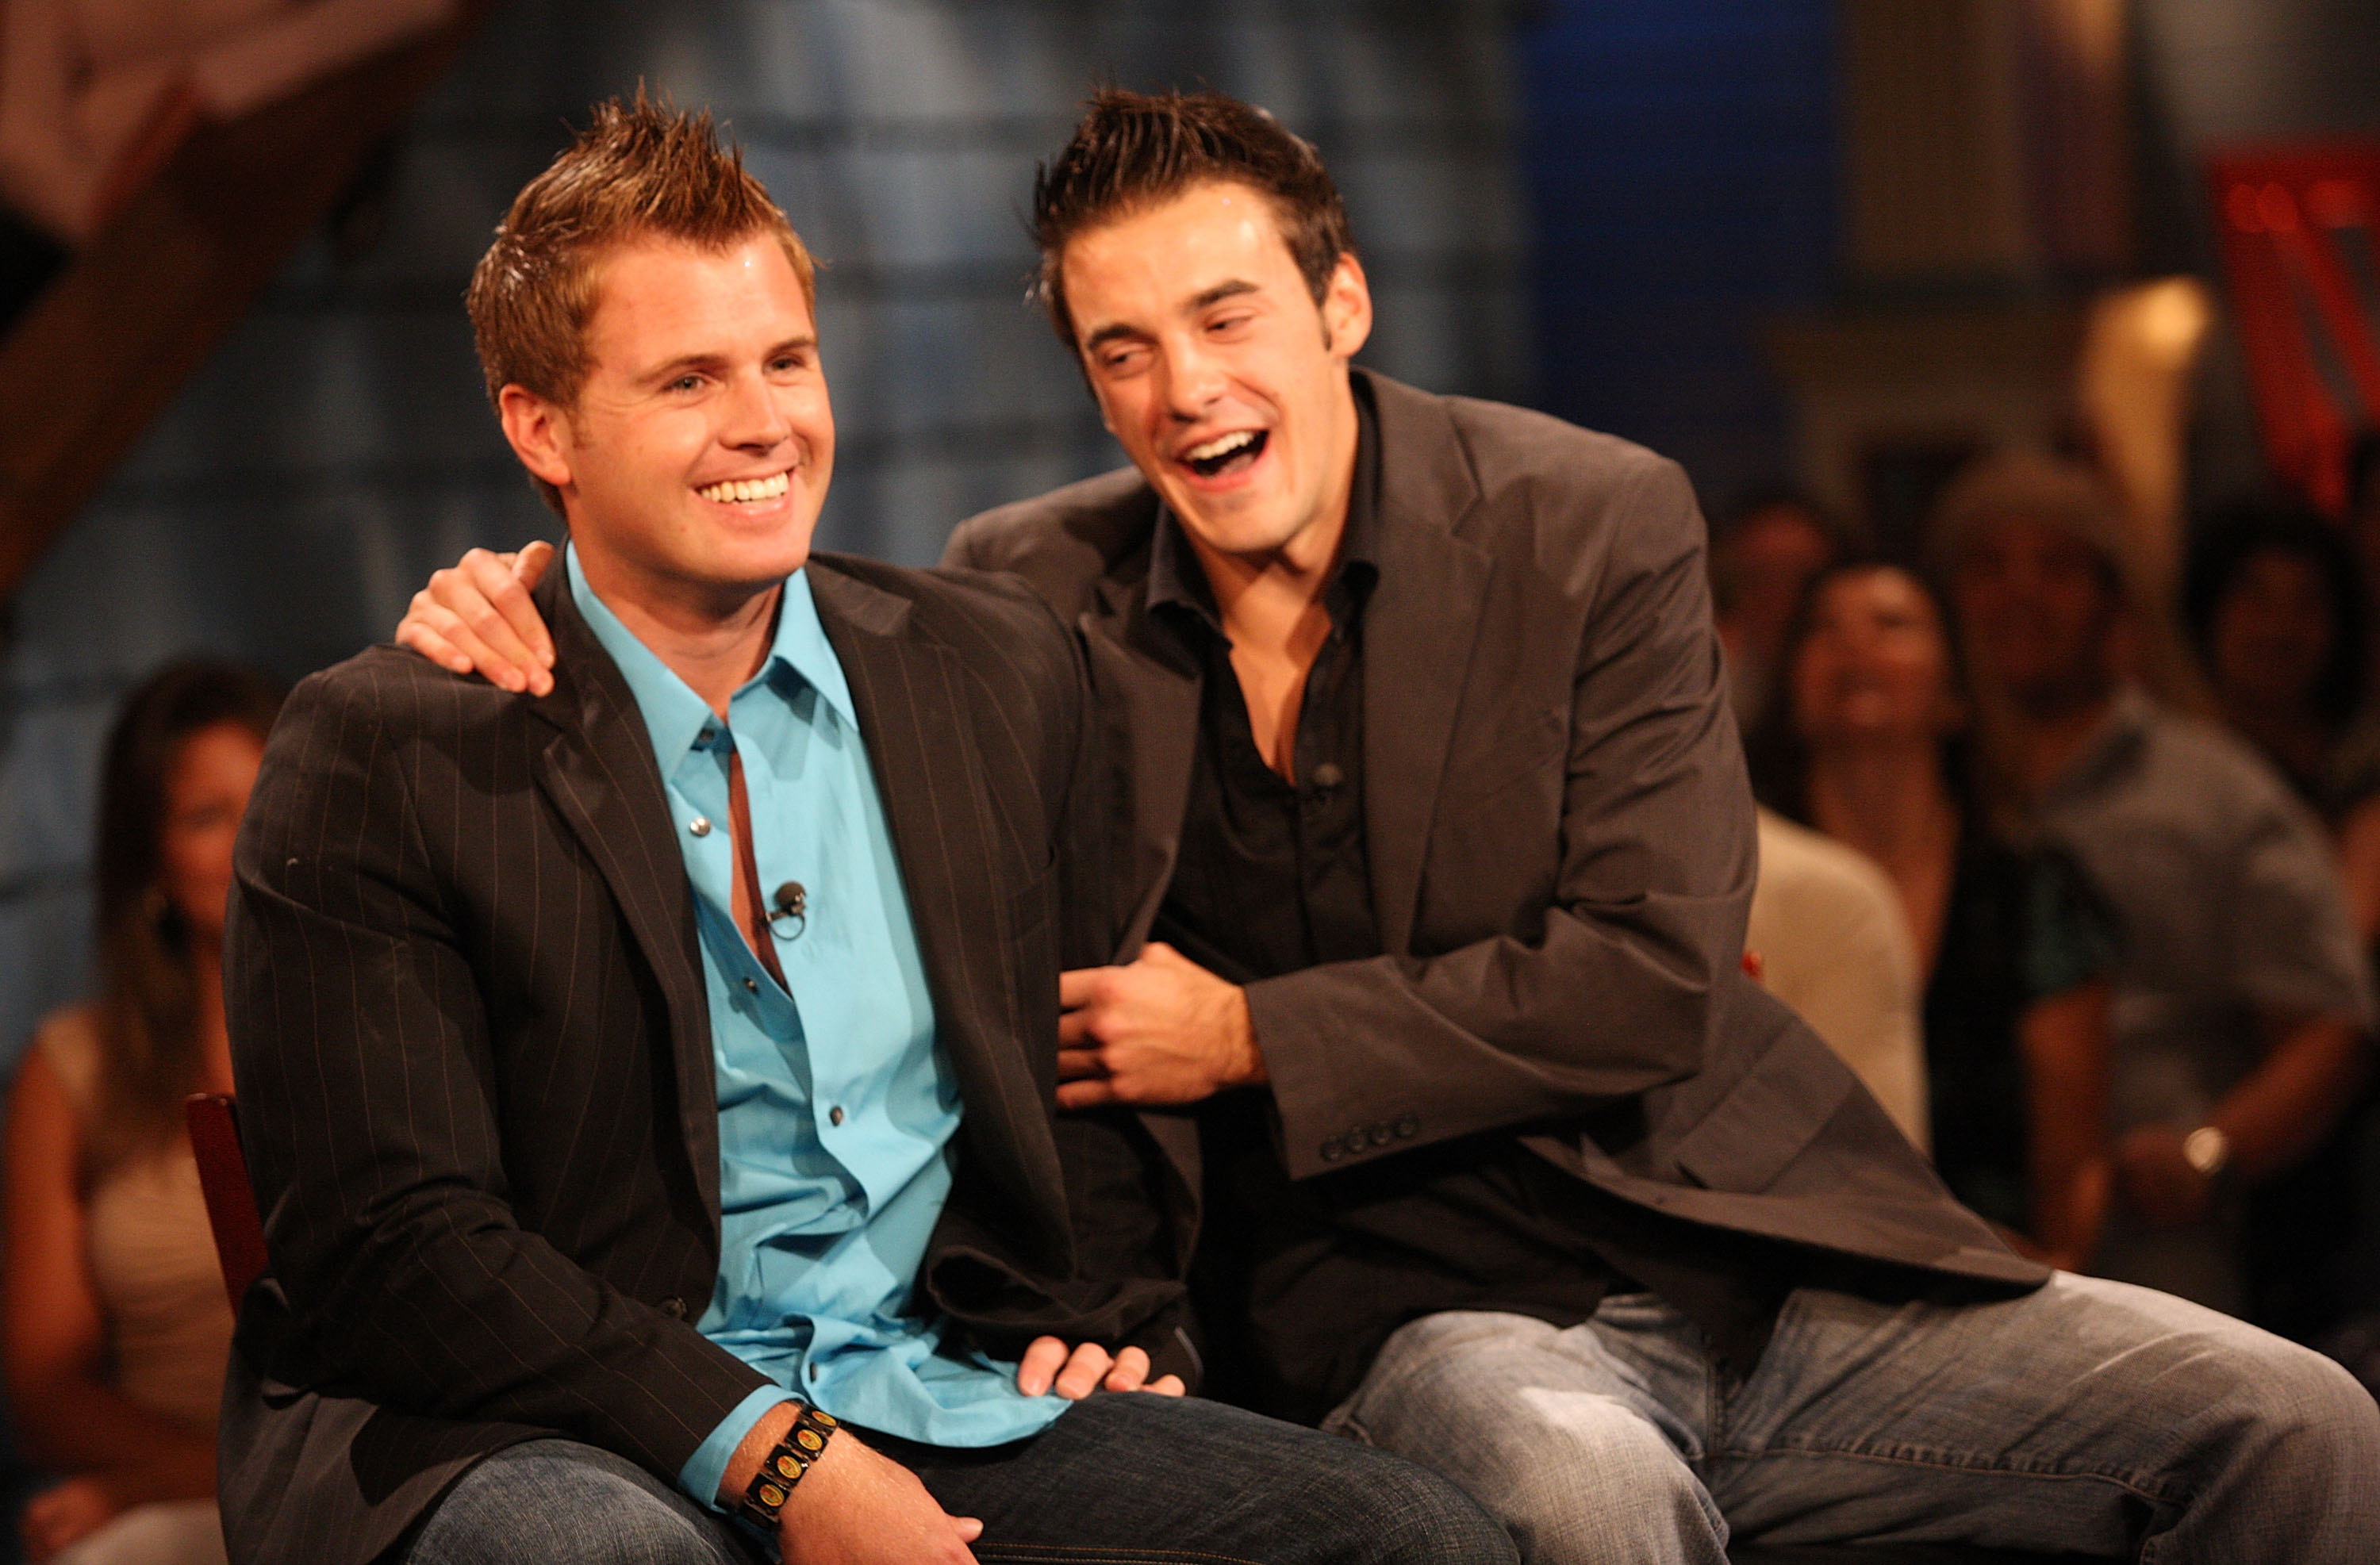 Second place contestant Memphis Garrett (L) and Dan Gheesling the winner of the "Big Brother Season 10 Grand Finale"